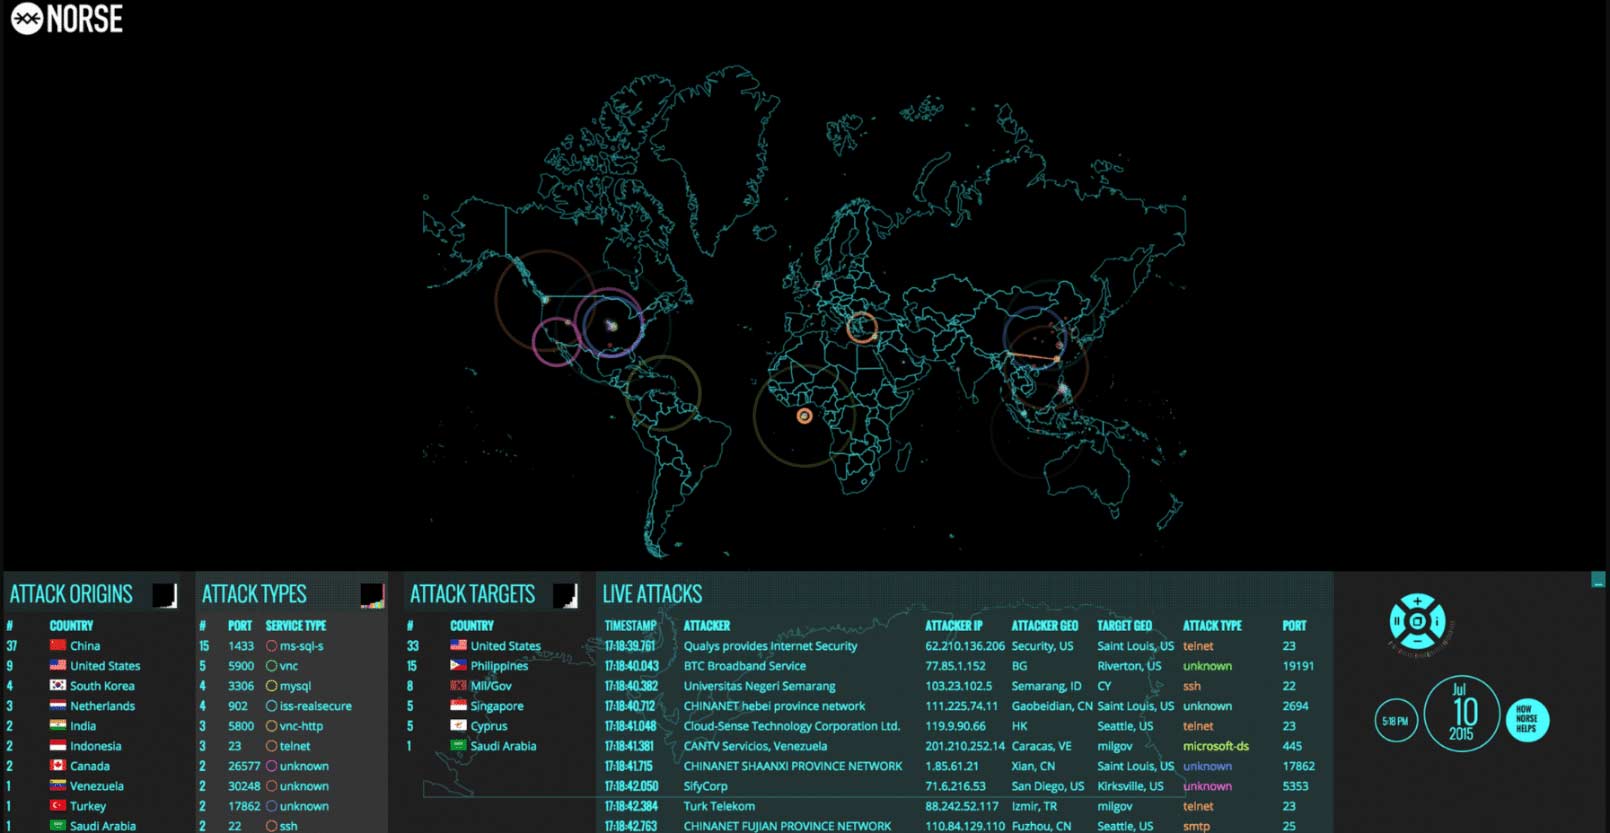 Cyber Attack Map by Norse